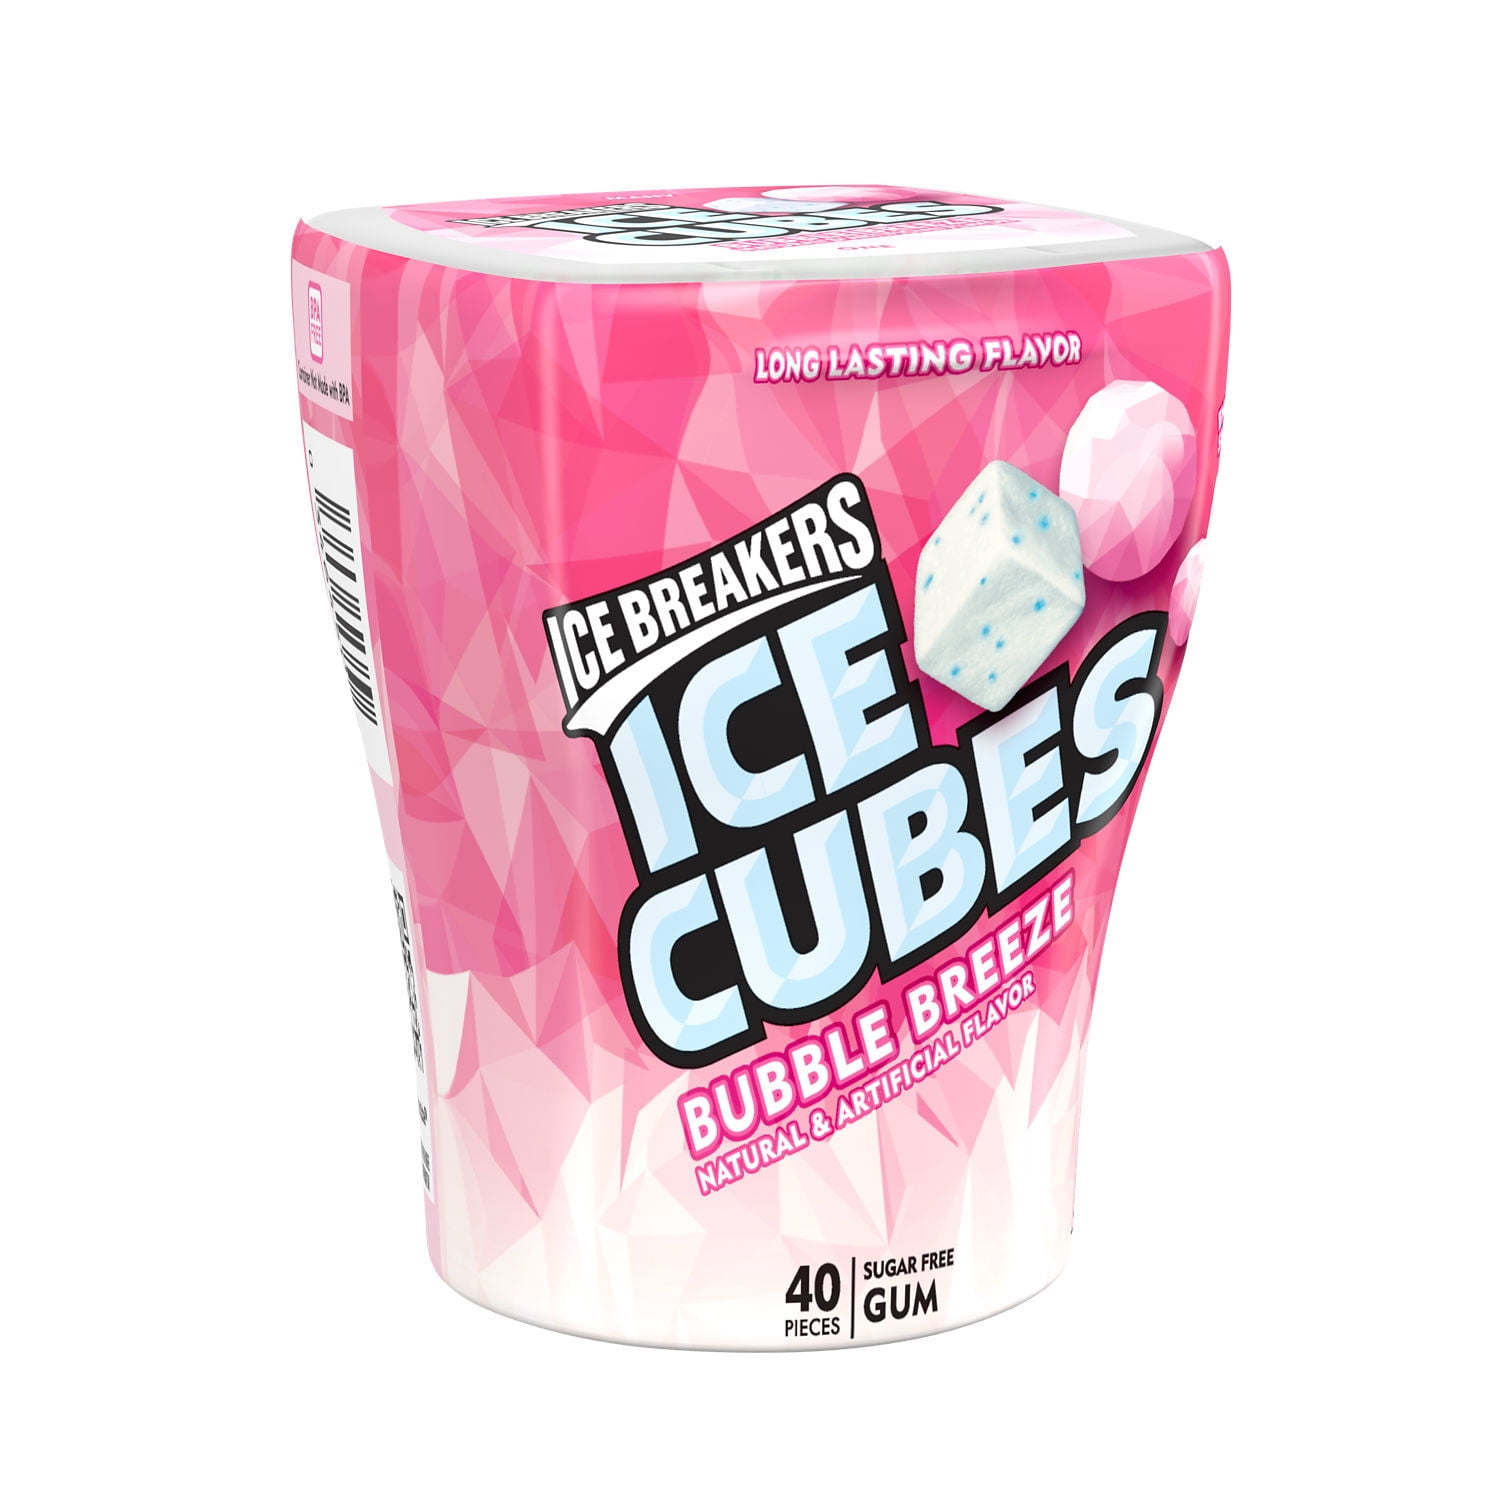 Ice Breakers Ice Cubes BUBBLE BREEZE Cooling Crystals, Made with Xylitol Sugar Free Chewing Gum Bottle, 3.24 oz (40 Pieces)